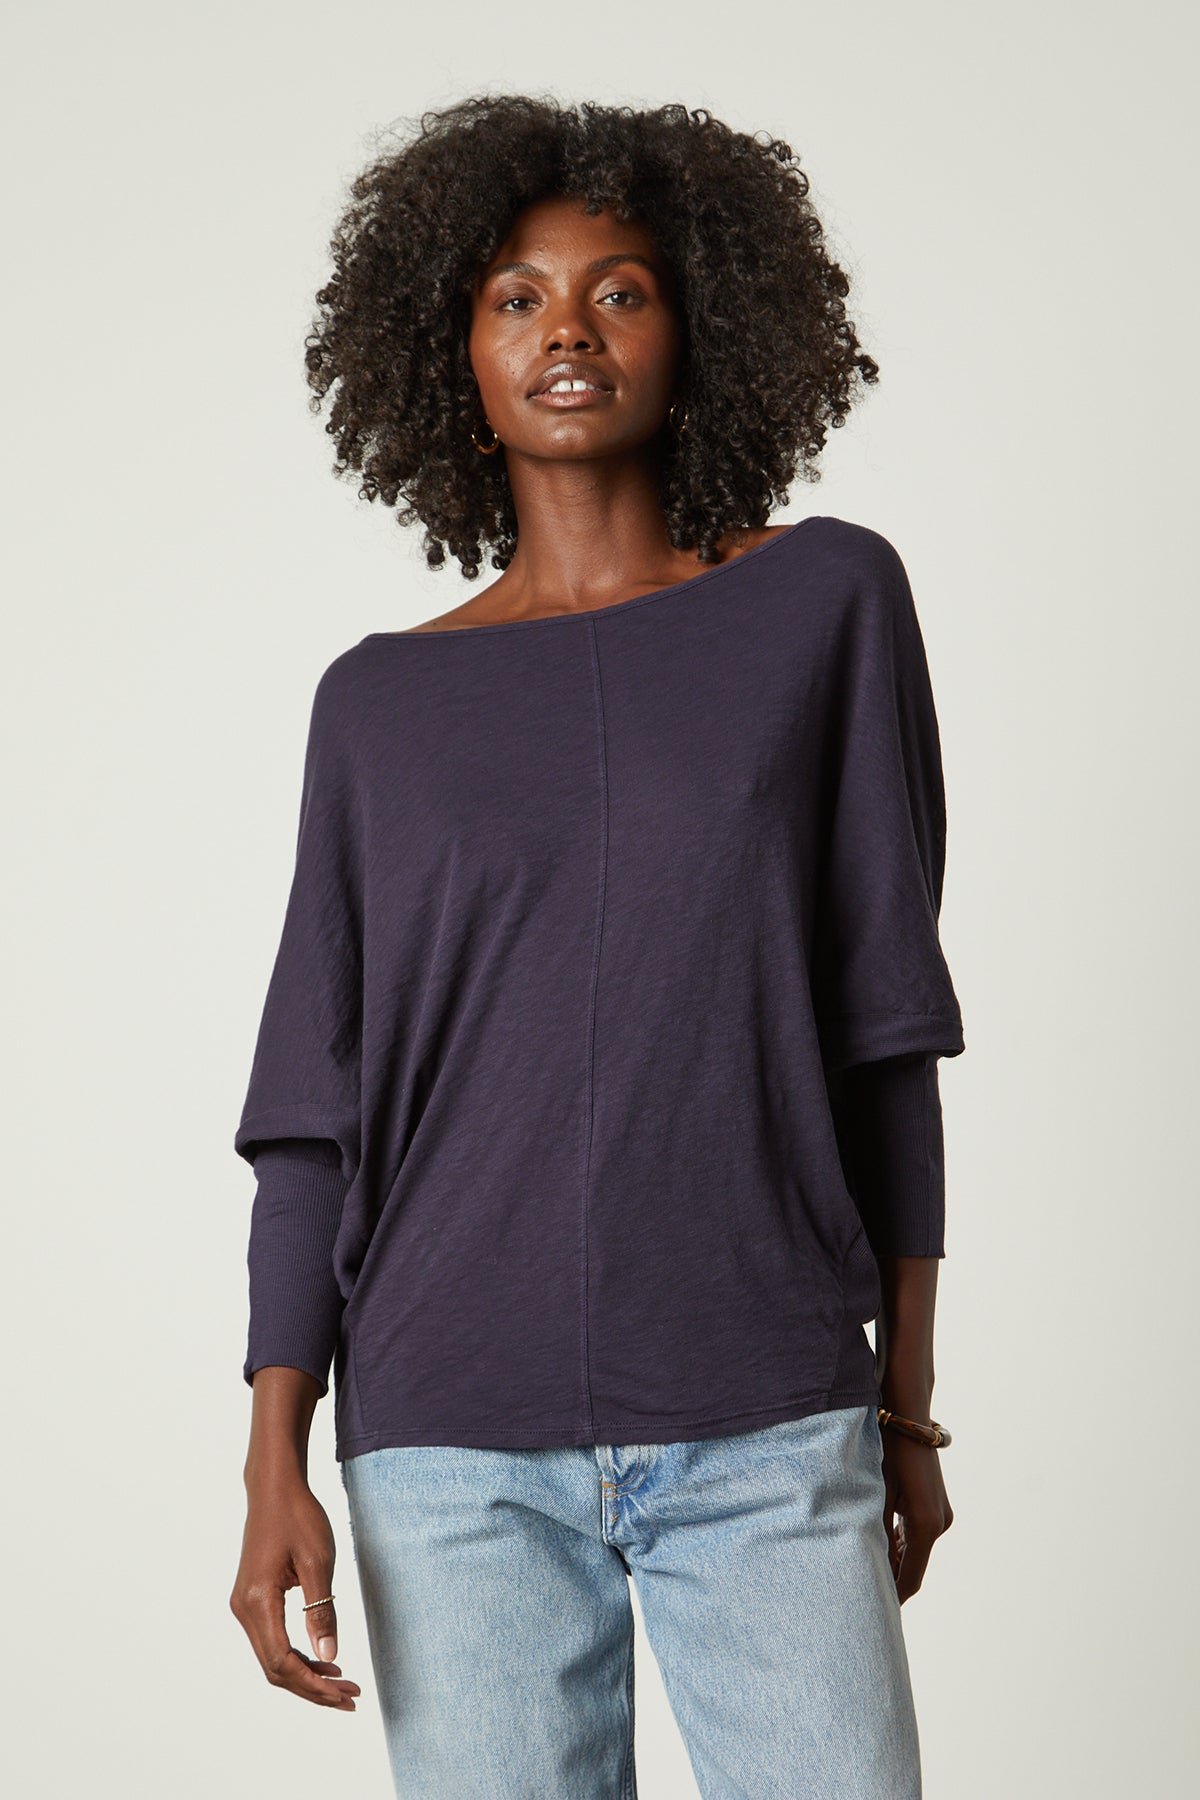 A woman wearing jeans and a Velvet by Graham & Spencer JOSS DOLMAN SLEEVE TEE.-26235745599681